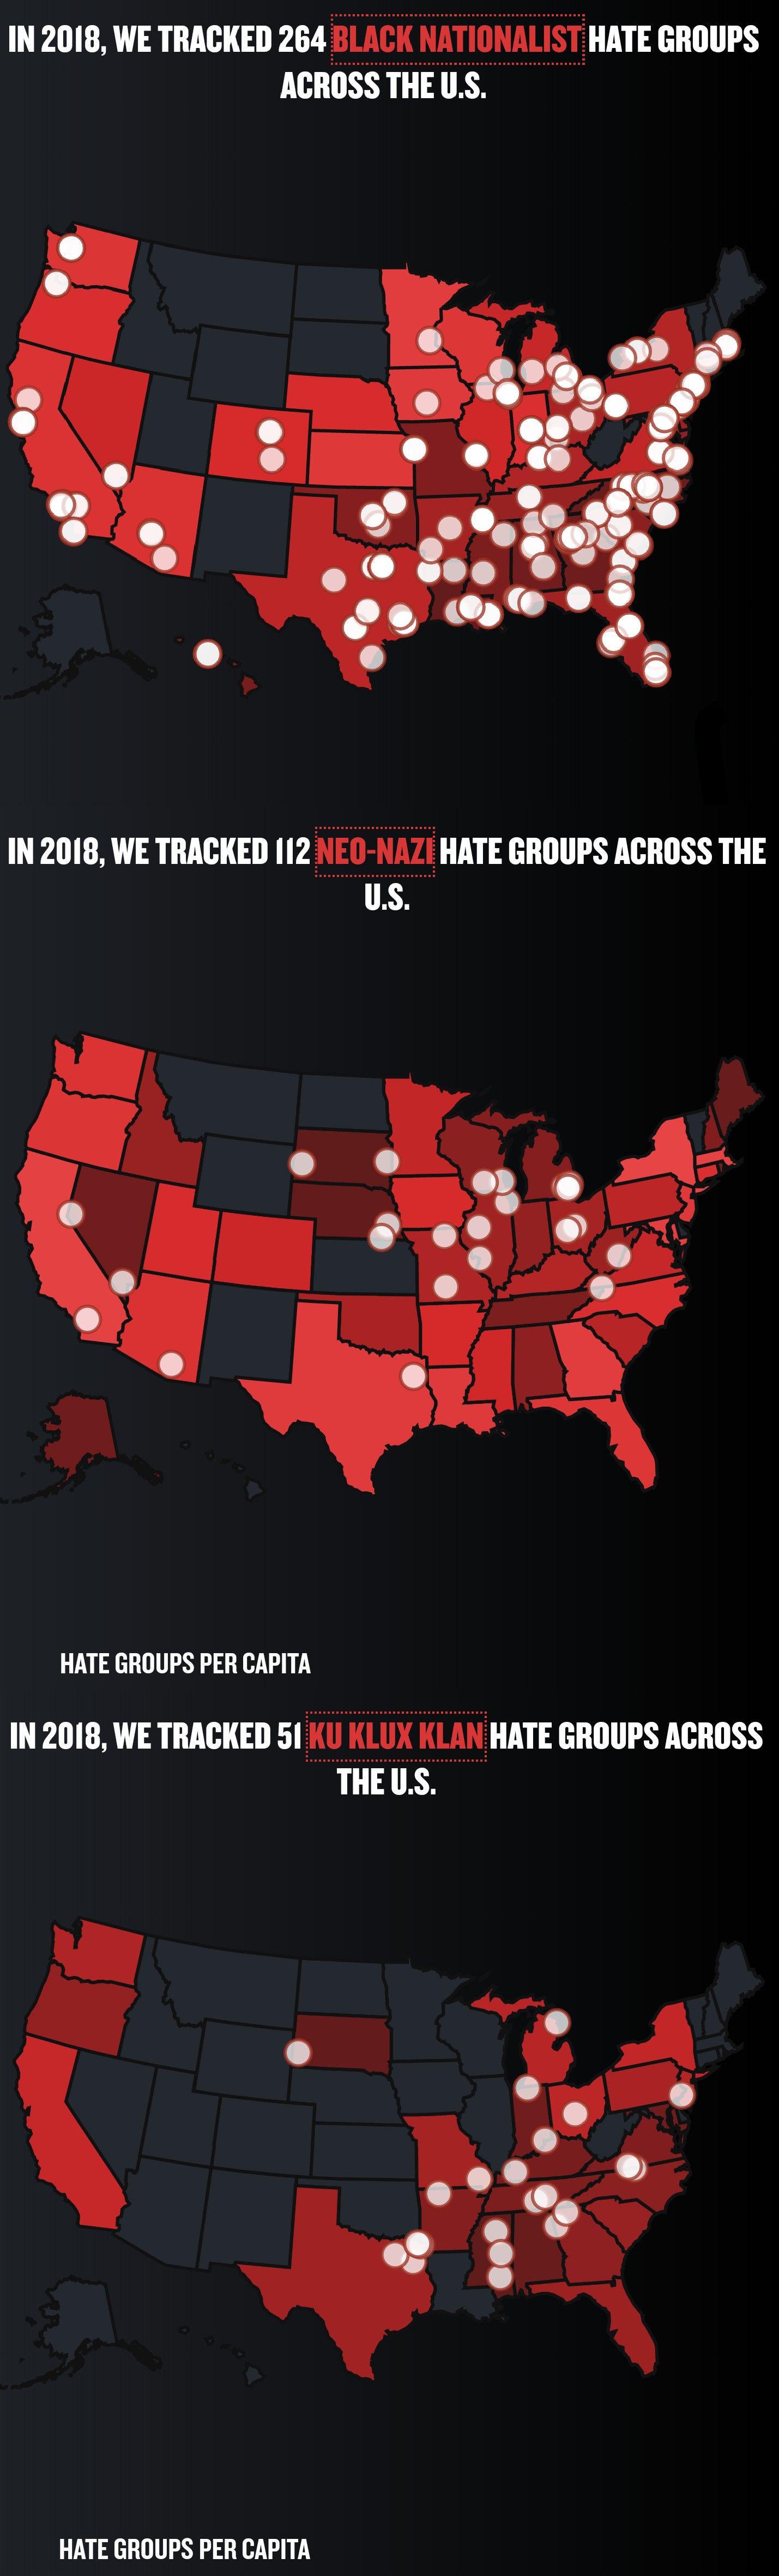 Even According to the leftwing think tank splc: the largest number of hate groups are leftwing  